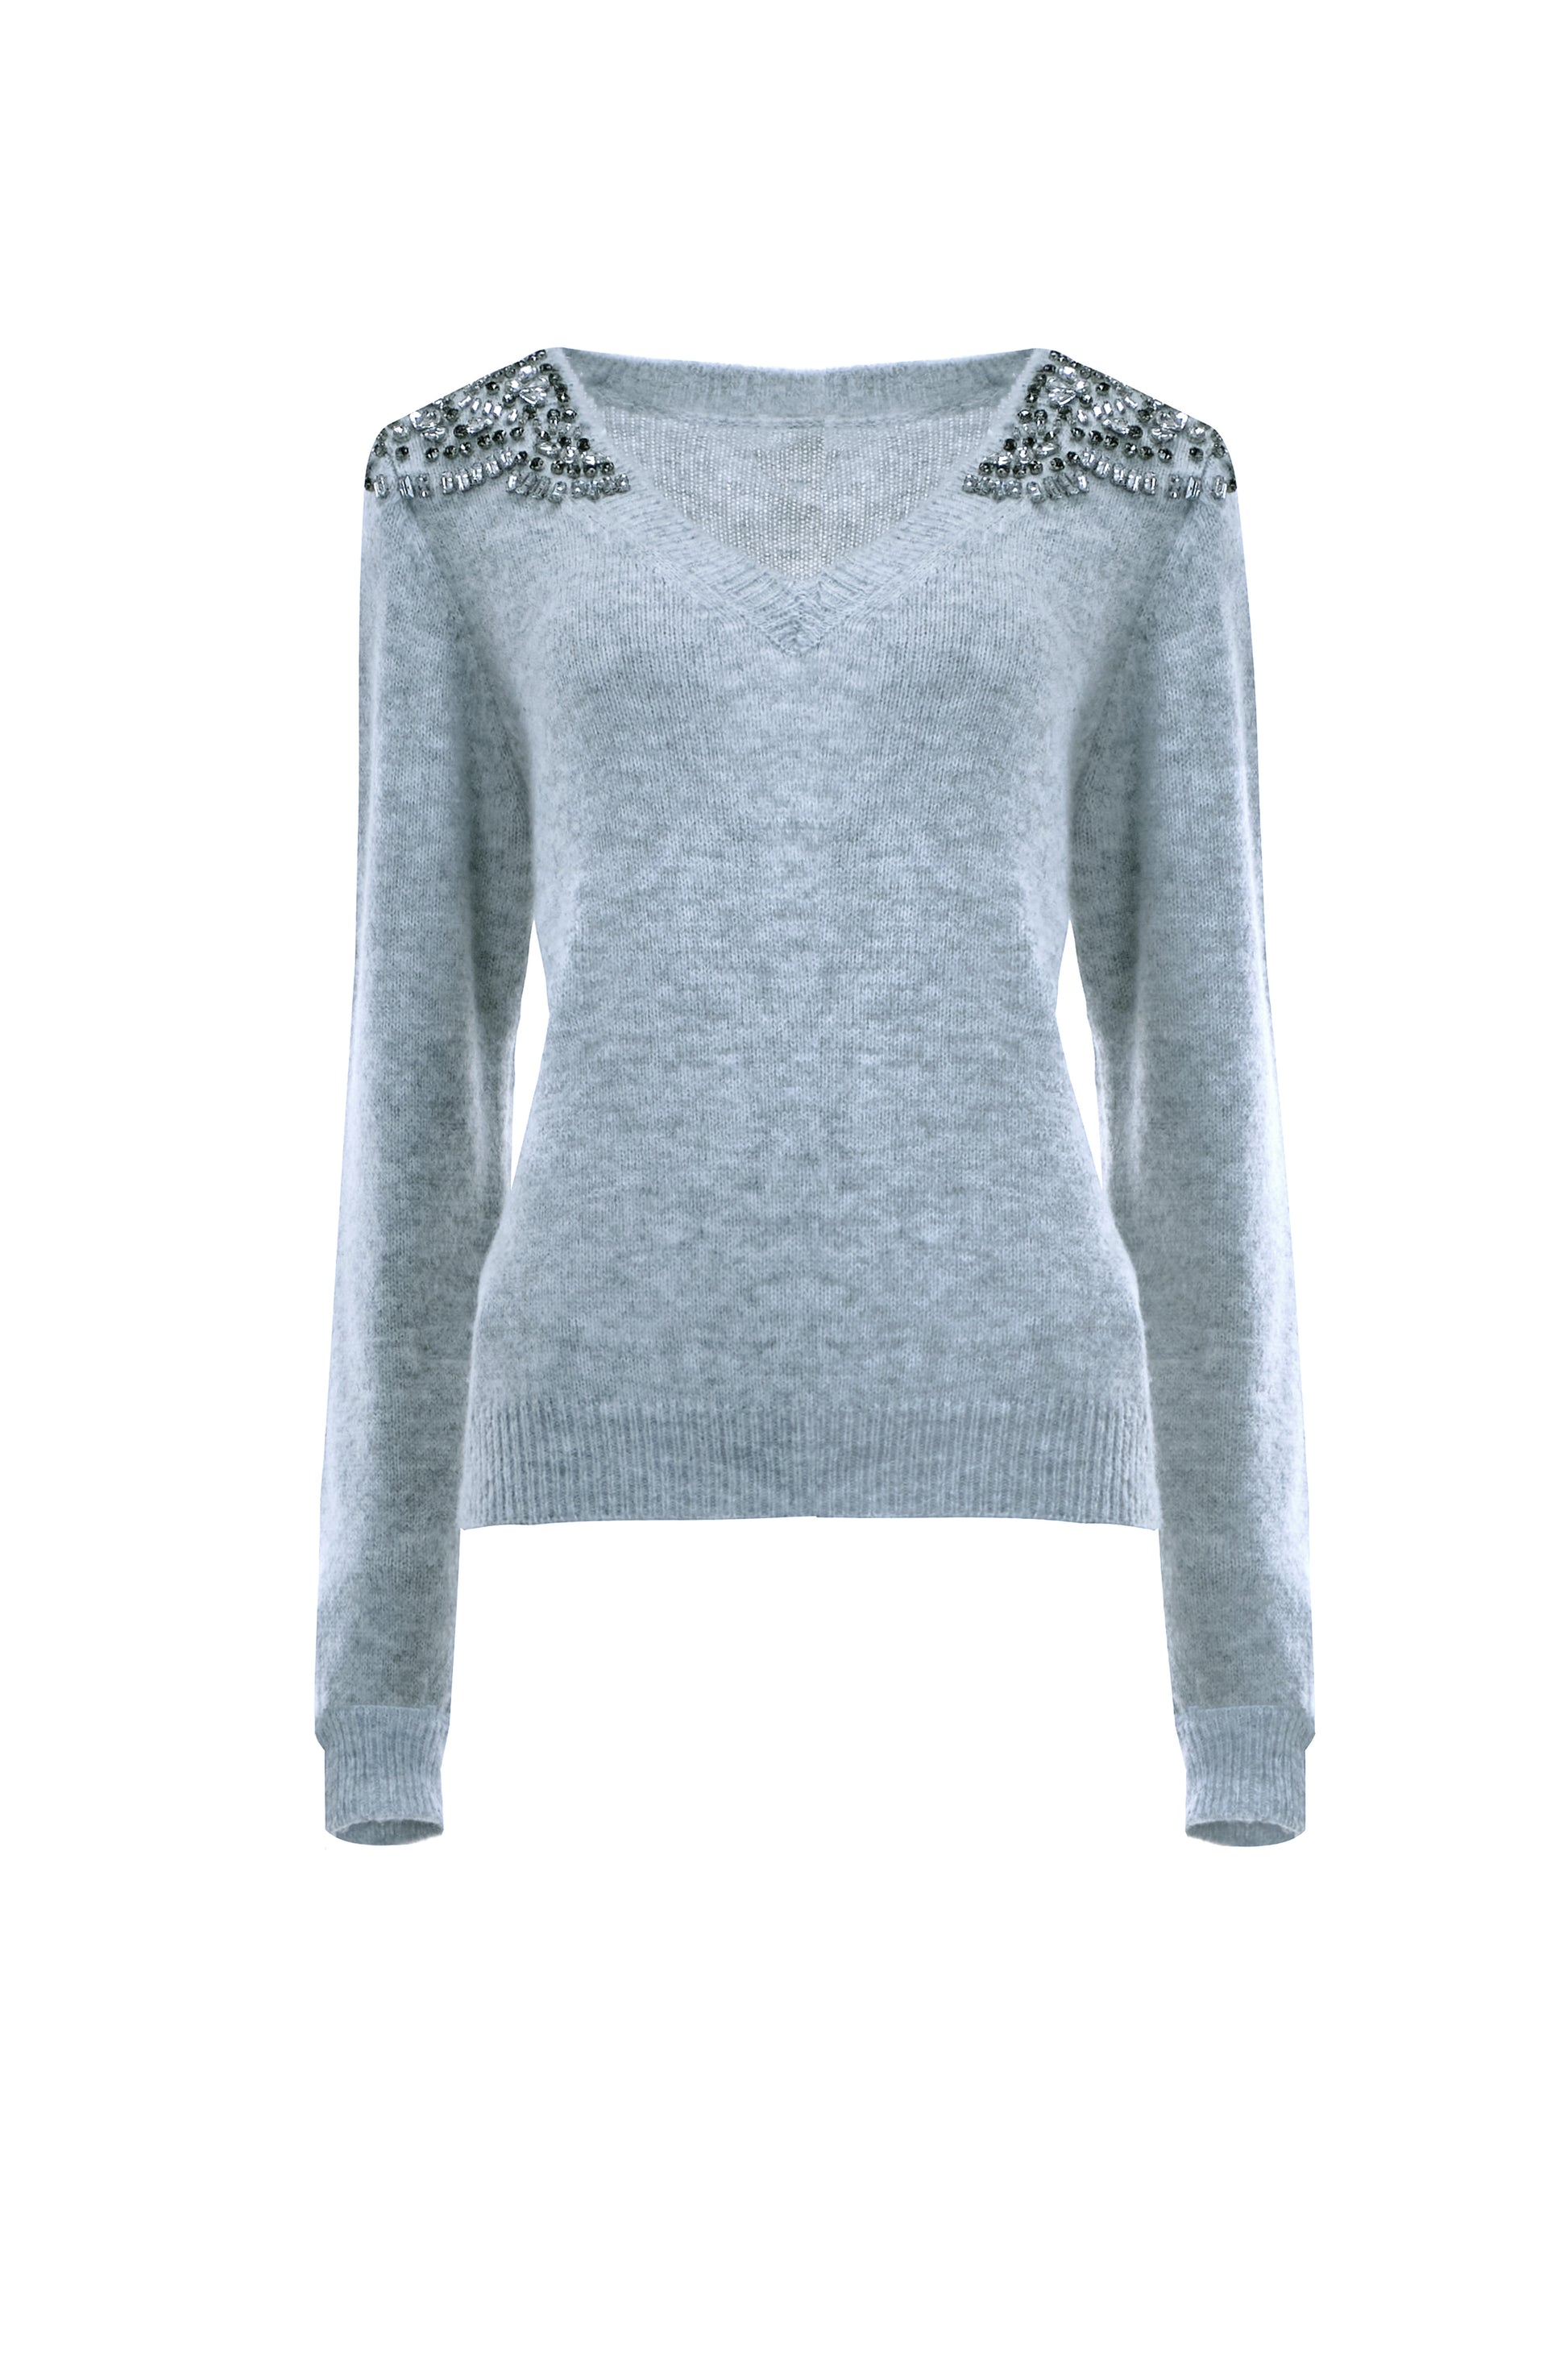 Studded Long Sleeve Sweater in Grey